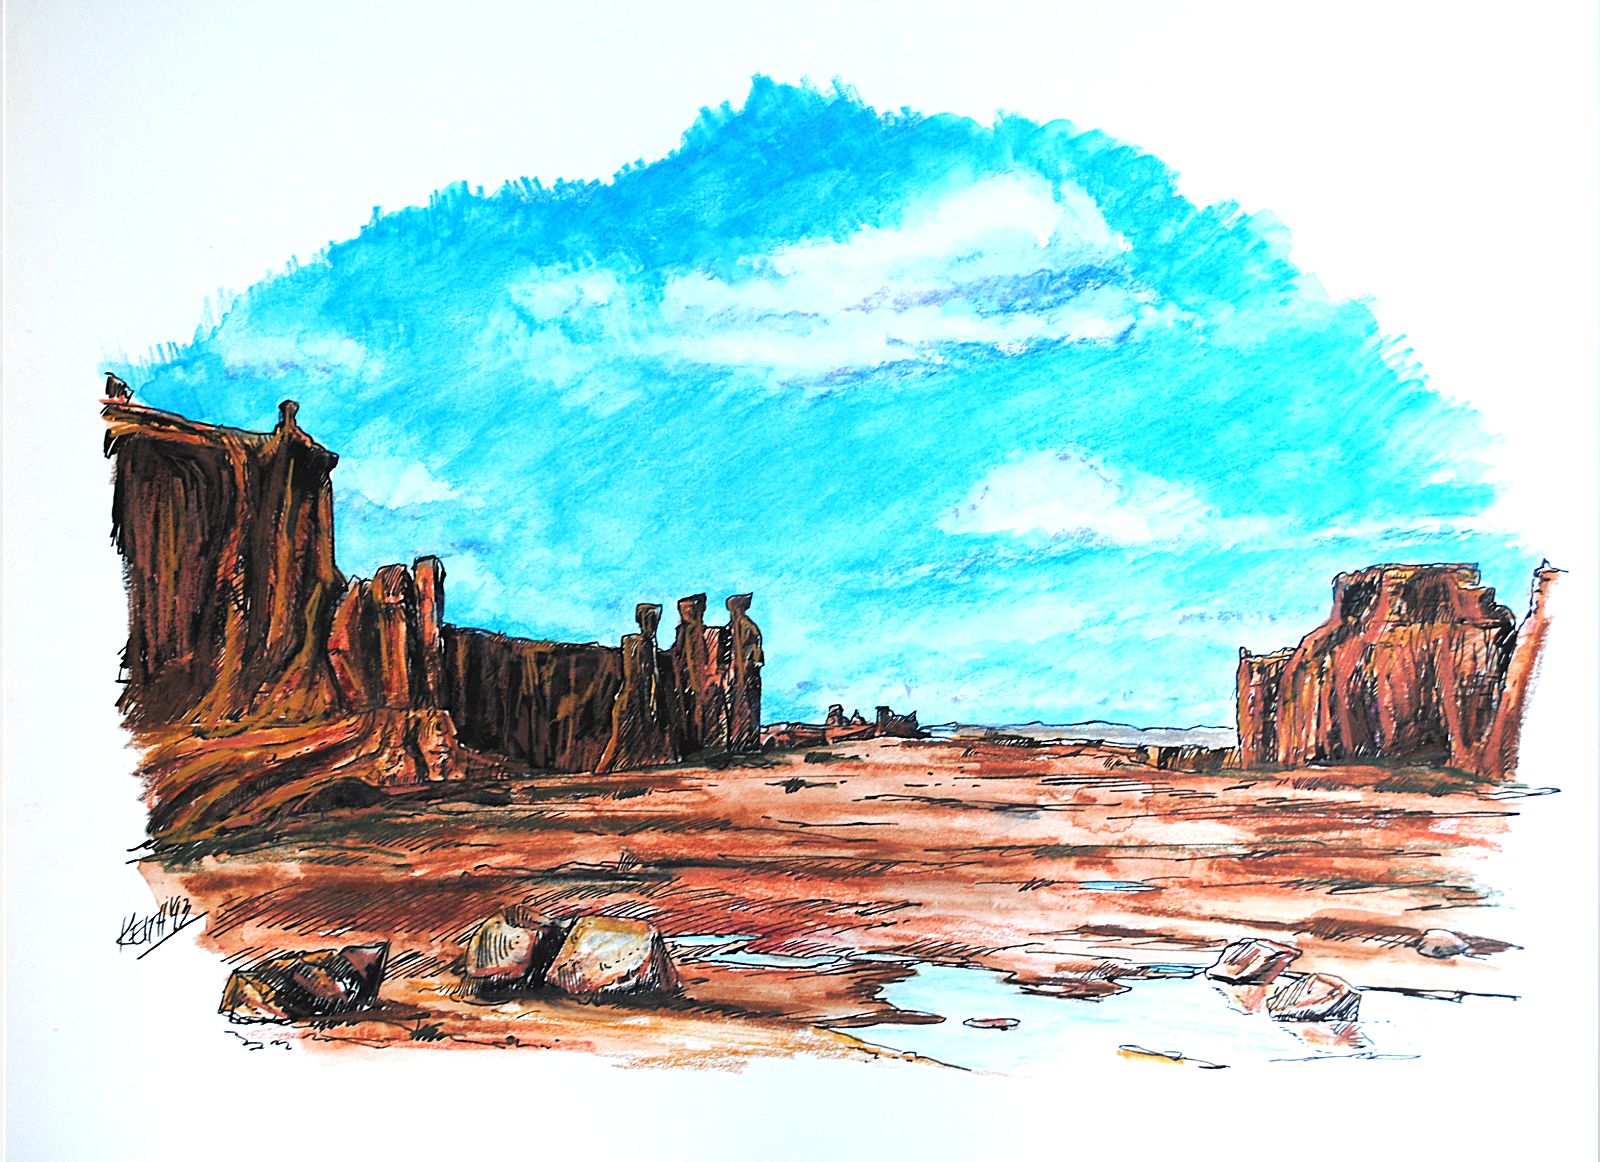 #12-The 3 Gossips, Arches National Monument 12FEB93 ©1993 by Ken Gilliland